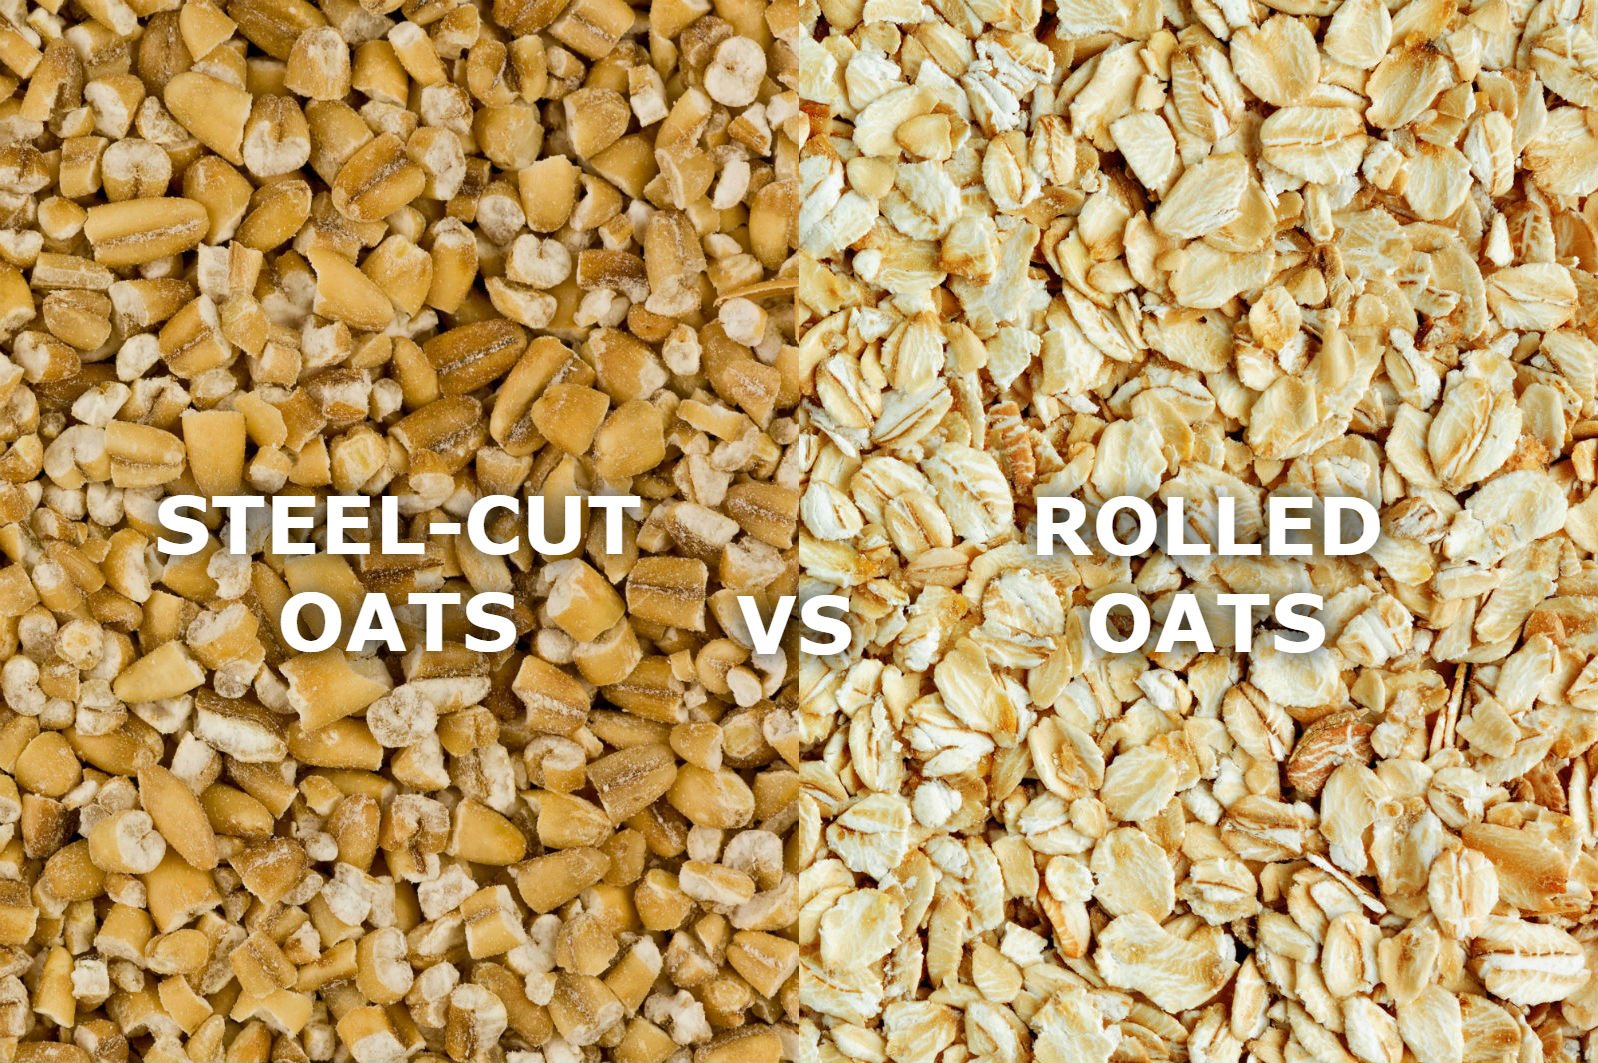 ARE STEEL-CUT OATS HEALTHIER THAN ROLLED OATS? - SPUD.ca